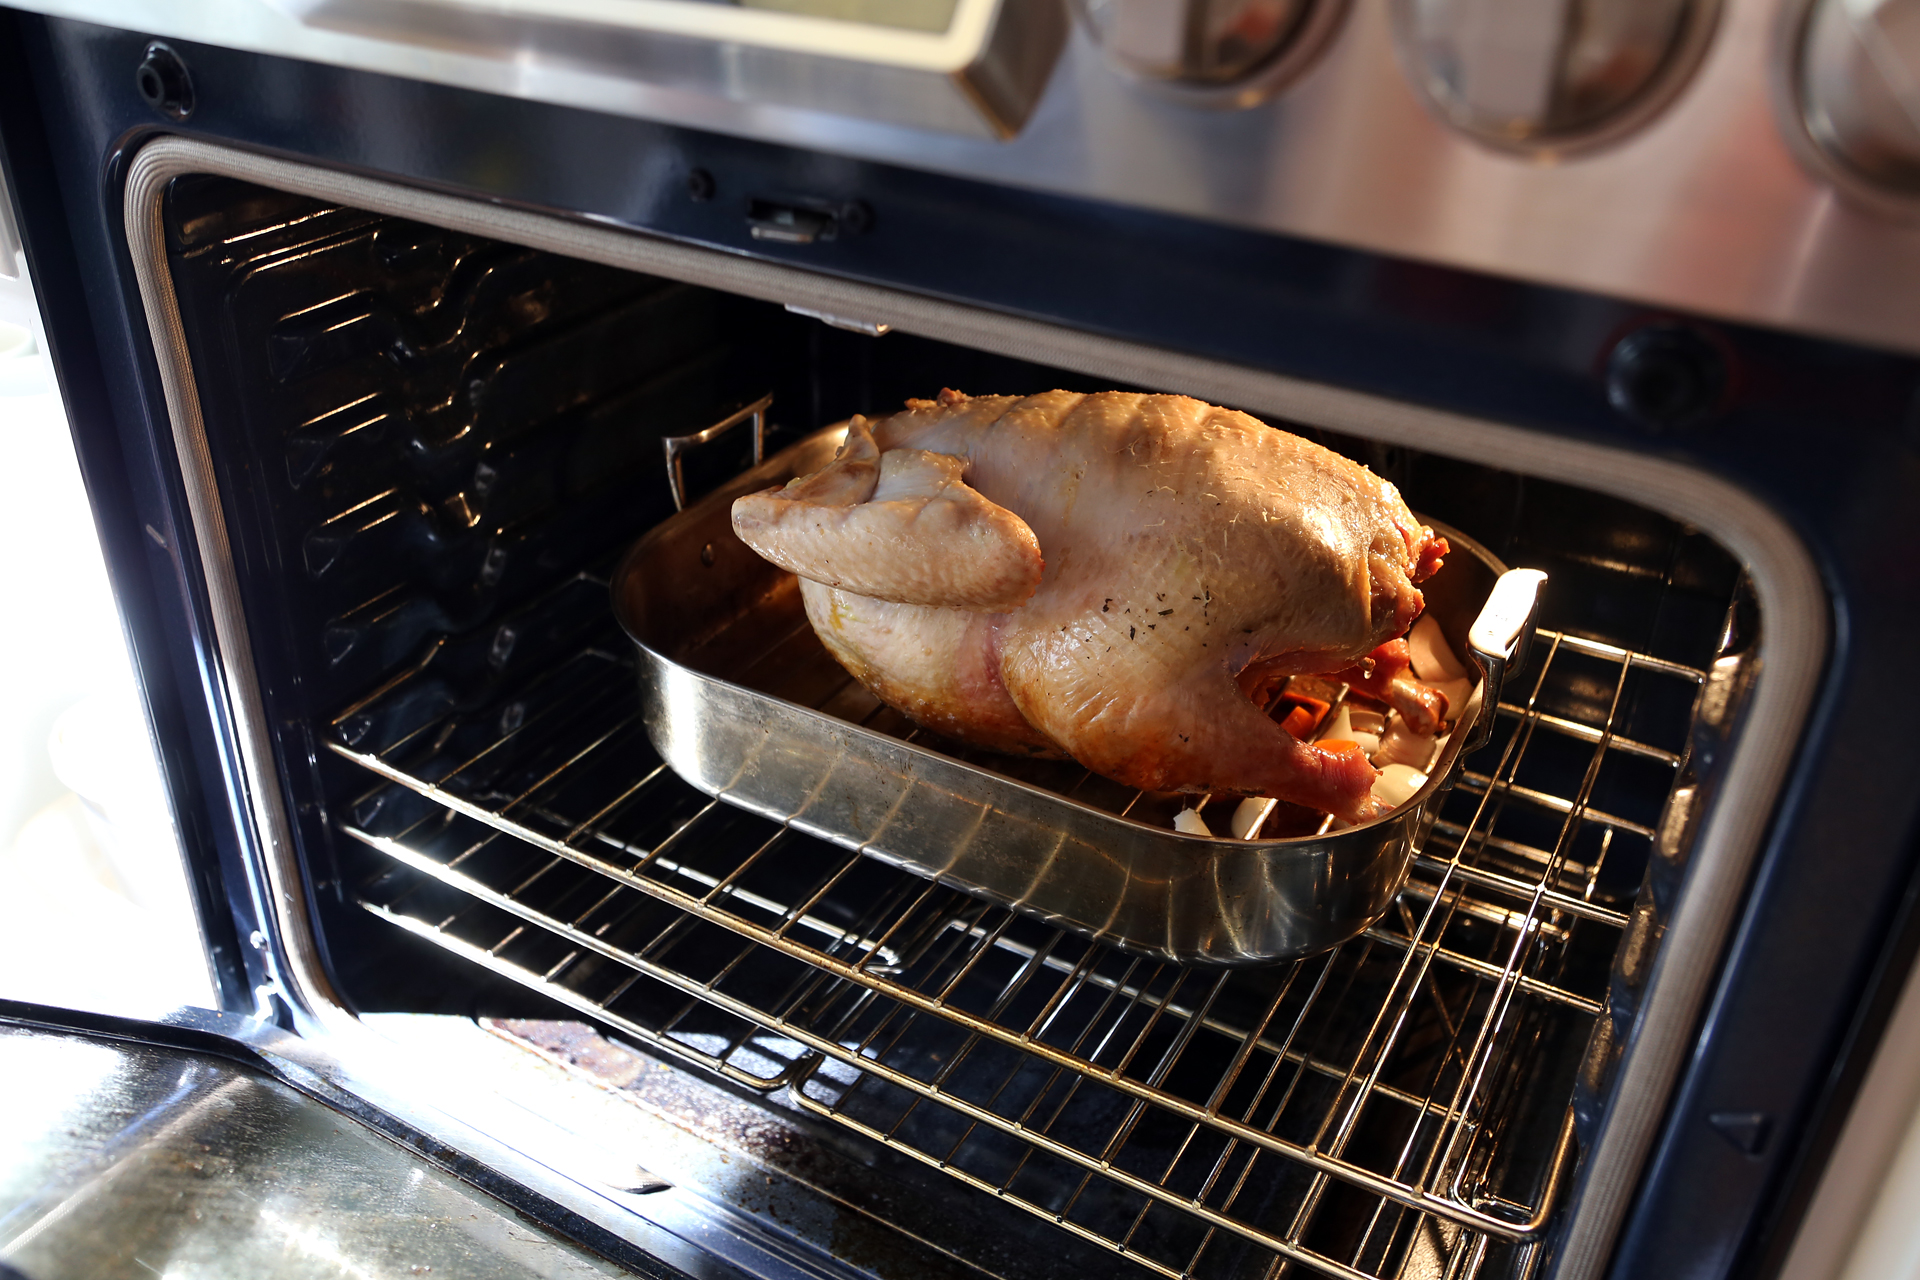 Turn the bird upside down to brown the bottom. Continue to roast, basting the turkey occasionally with the pan juices, for 1 more hour.